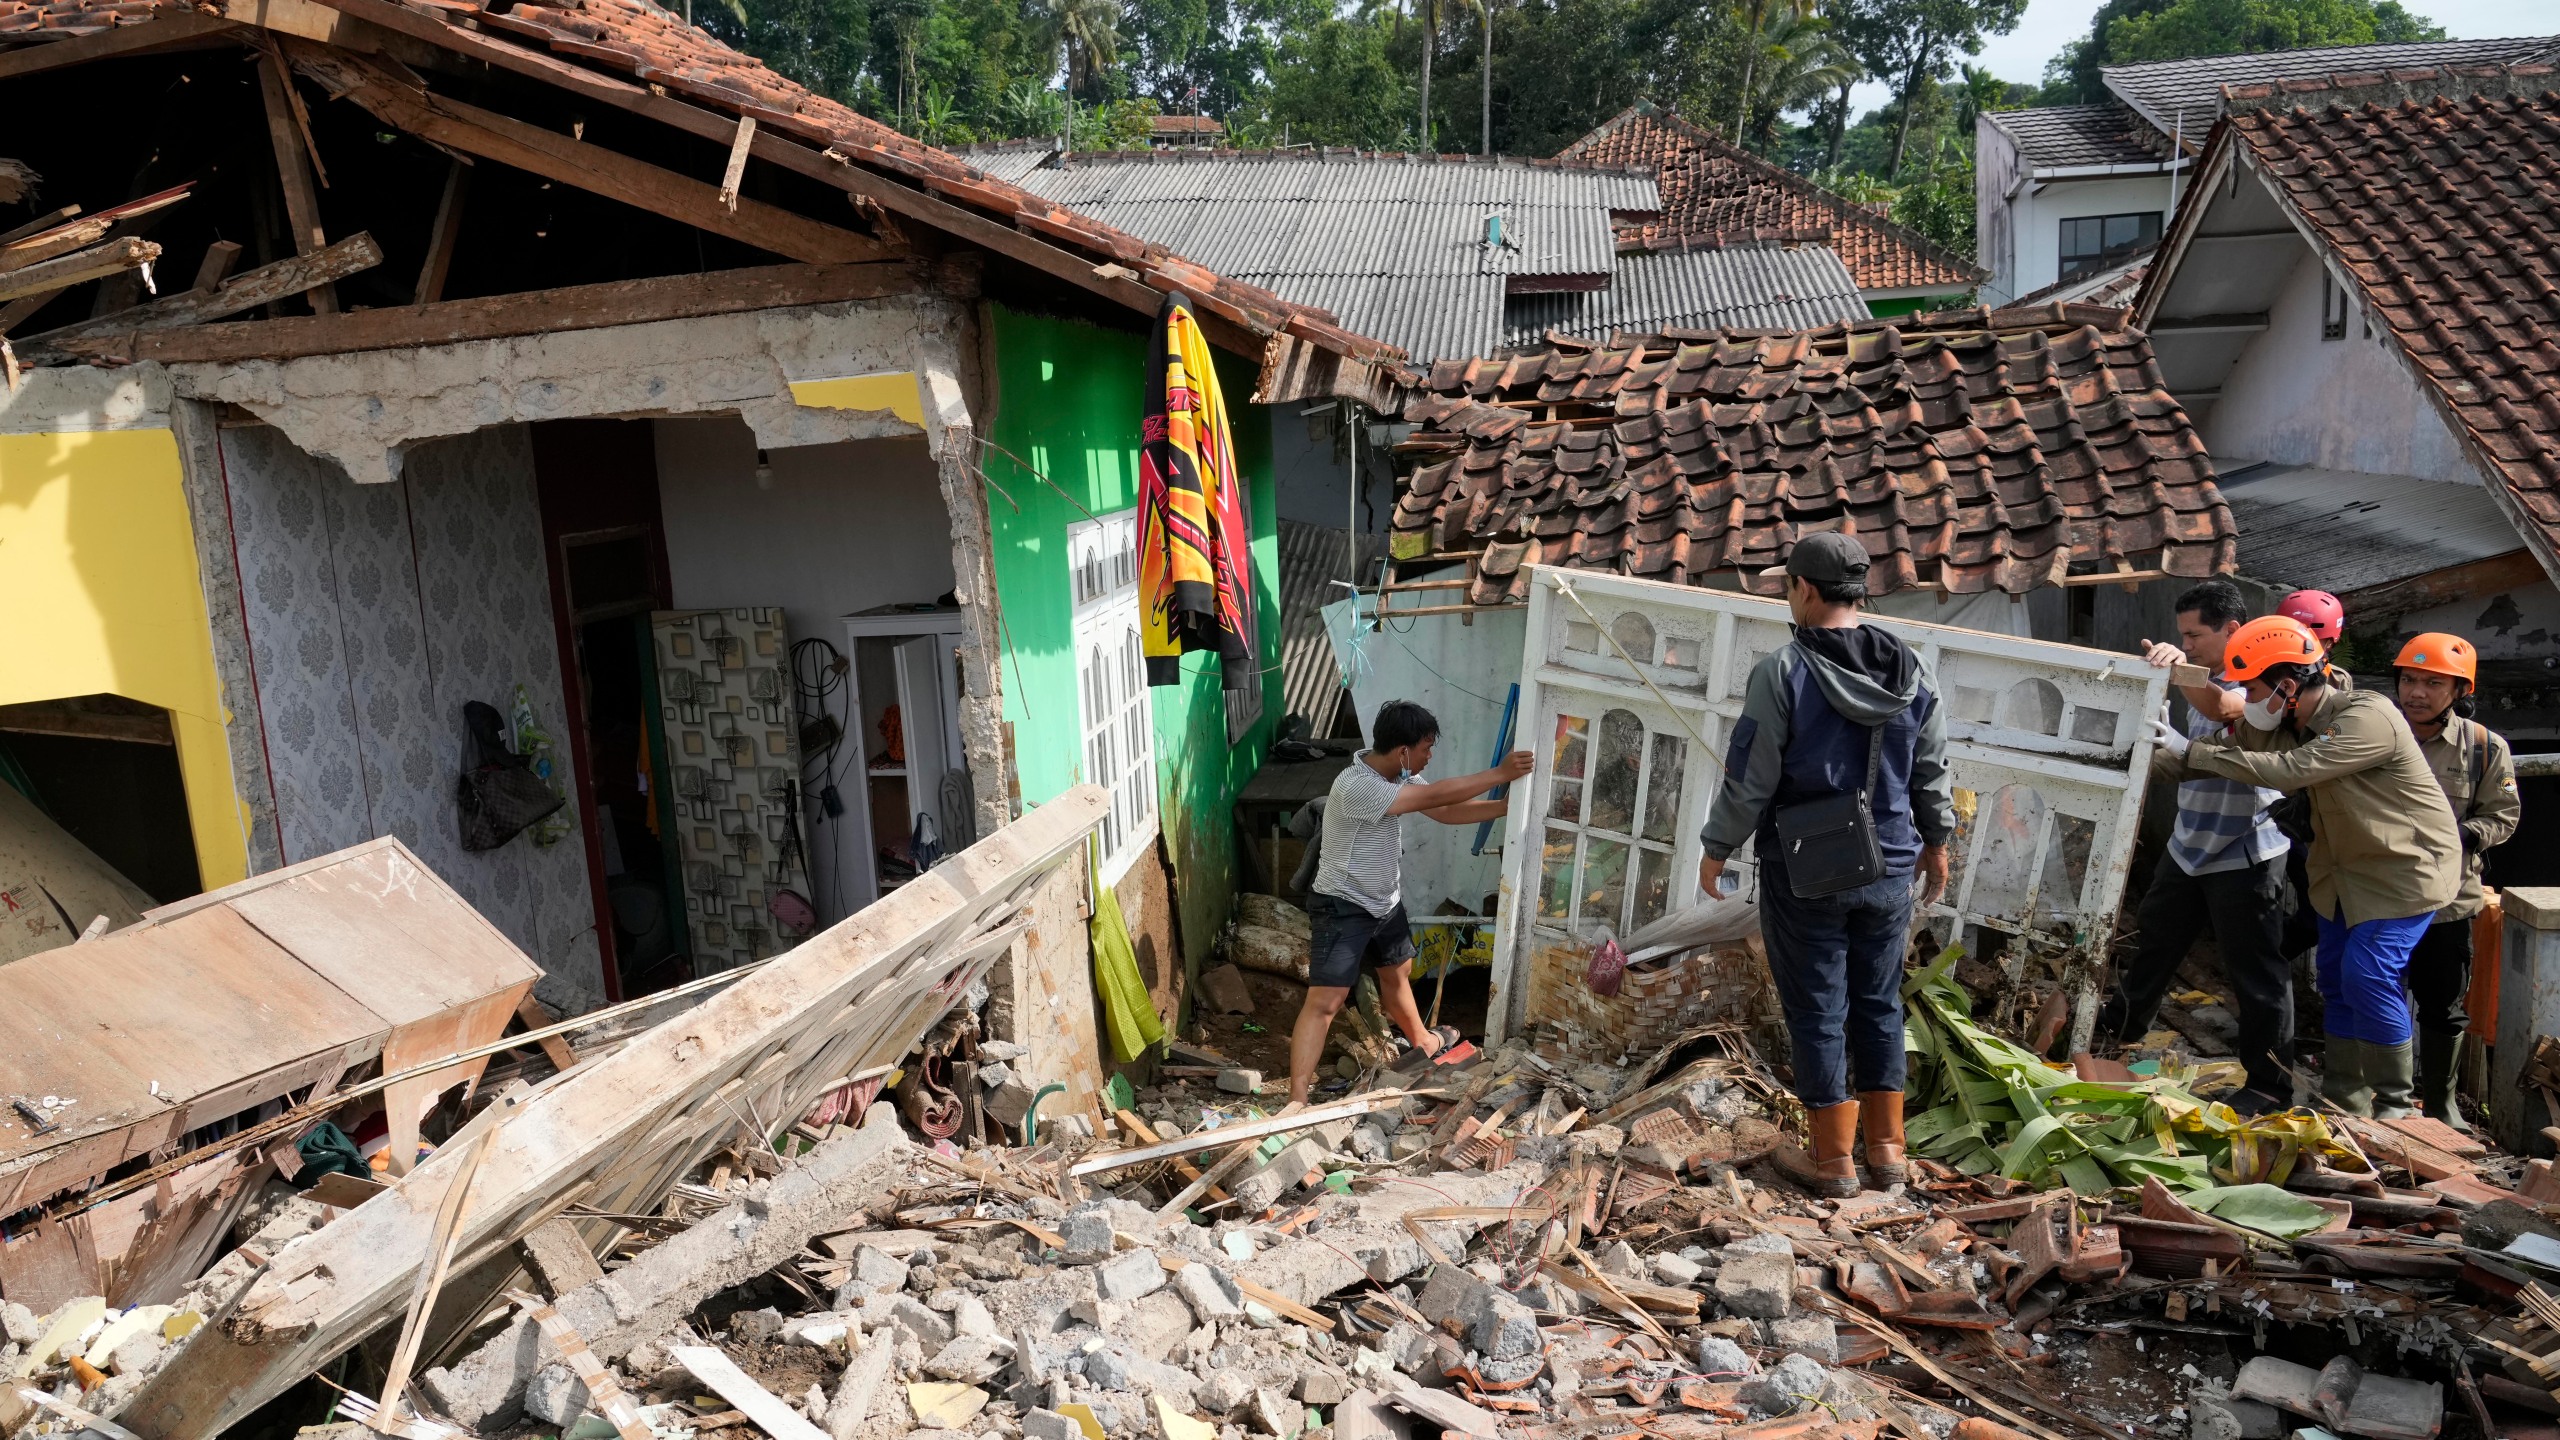 Aid flows to quake-hit areas in west Indonesia